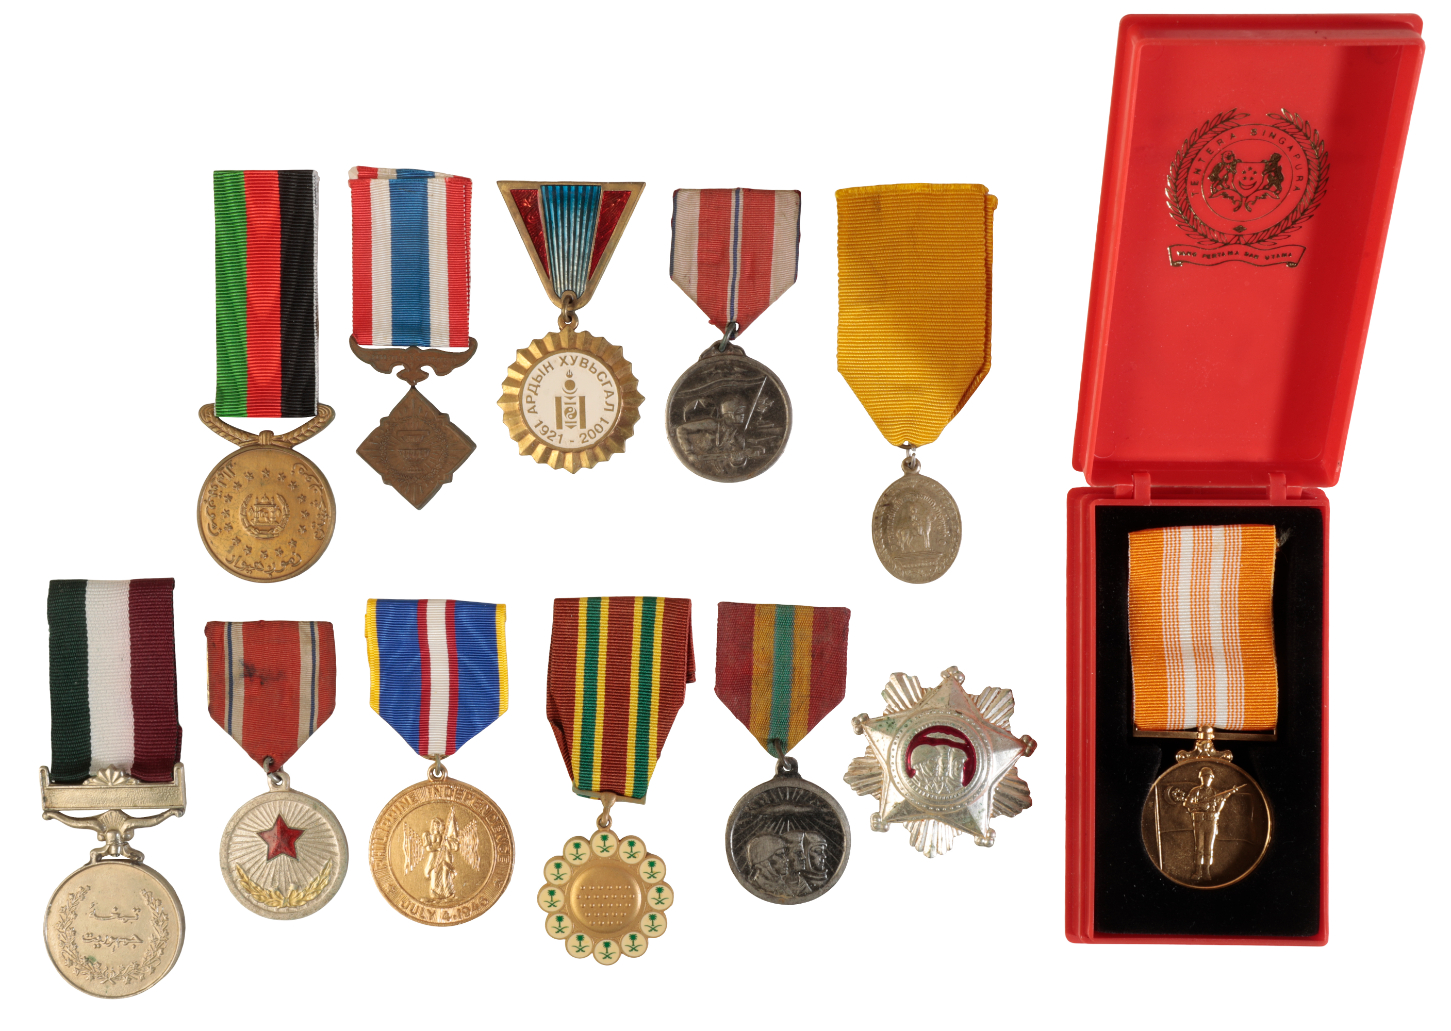 A COLLECTION OF MEDALS OF ASIAN COUNTRIES